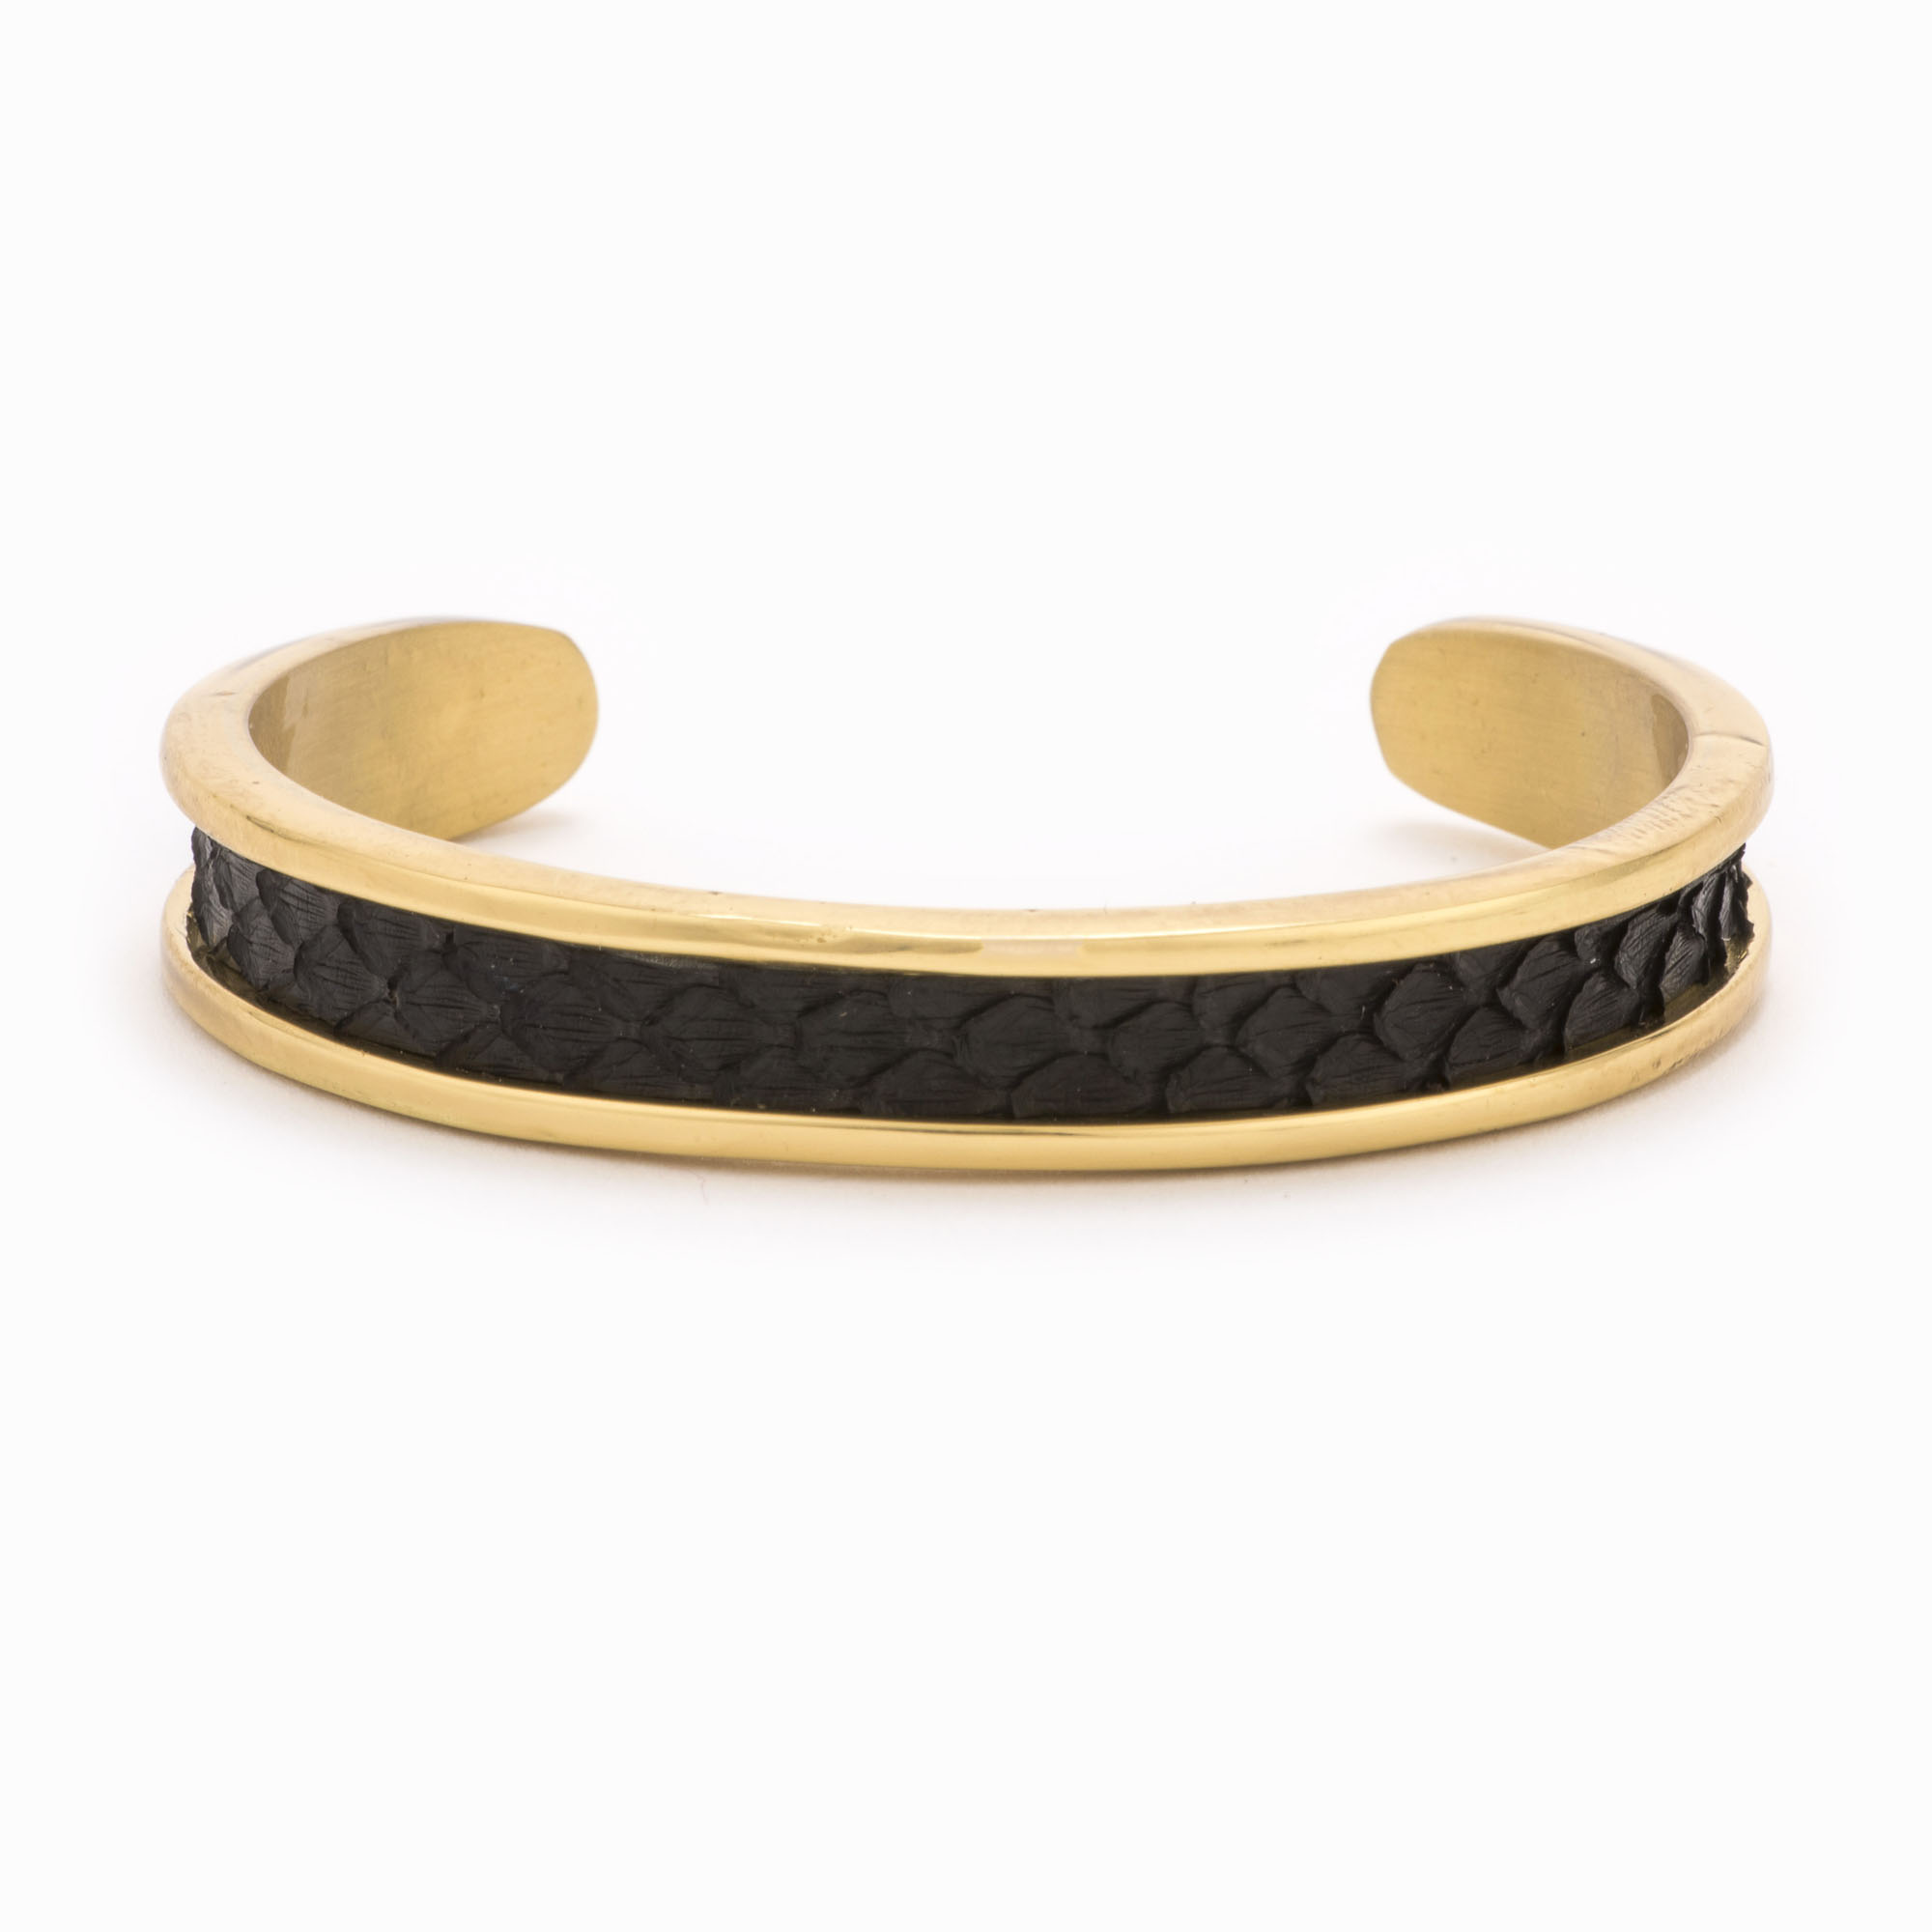 Featured image for “Small Black Gold Cuff”